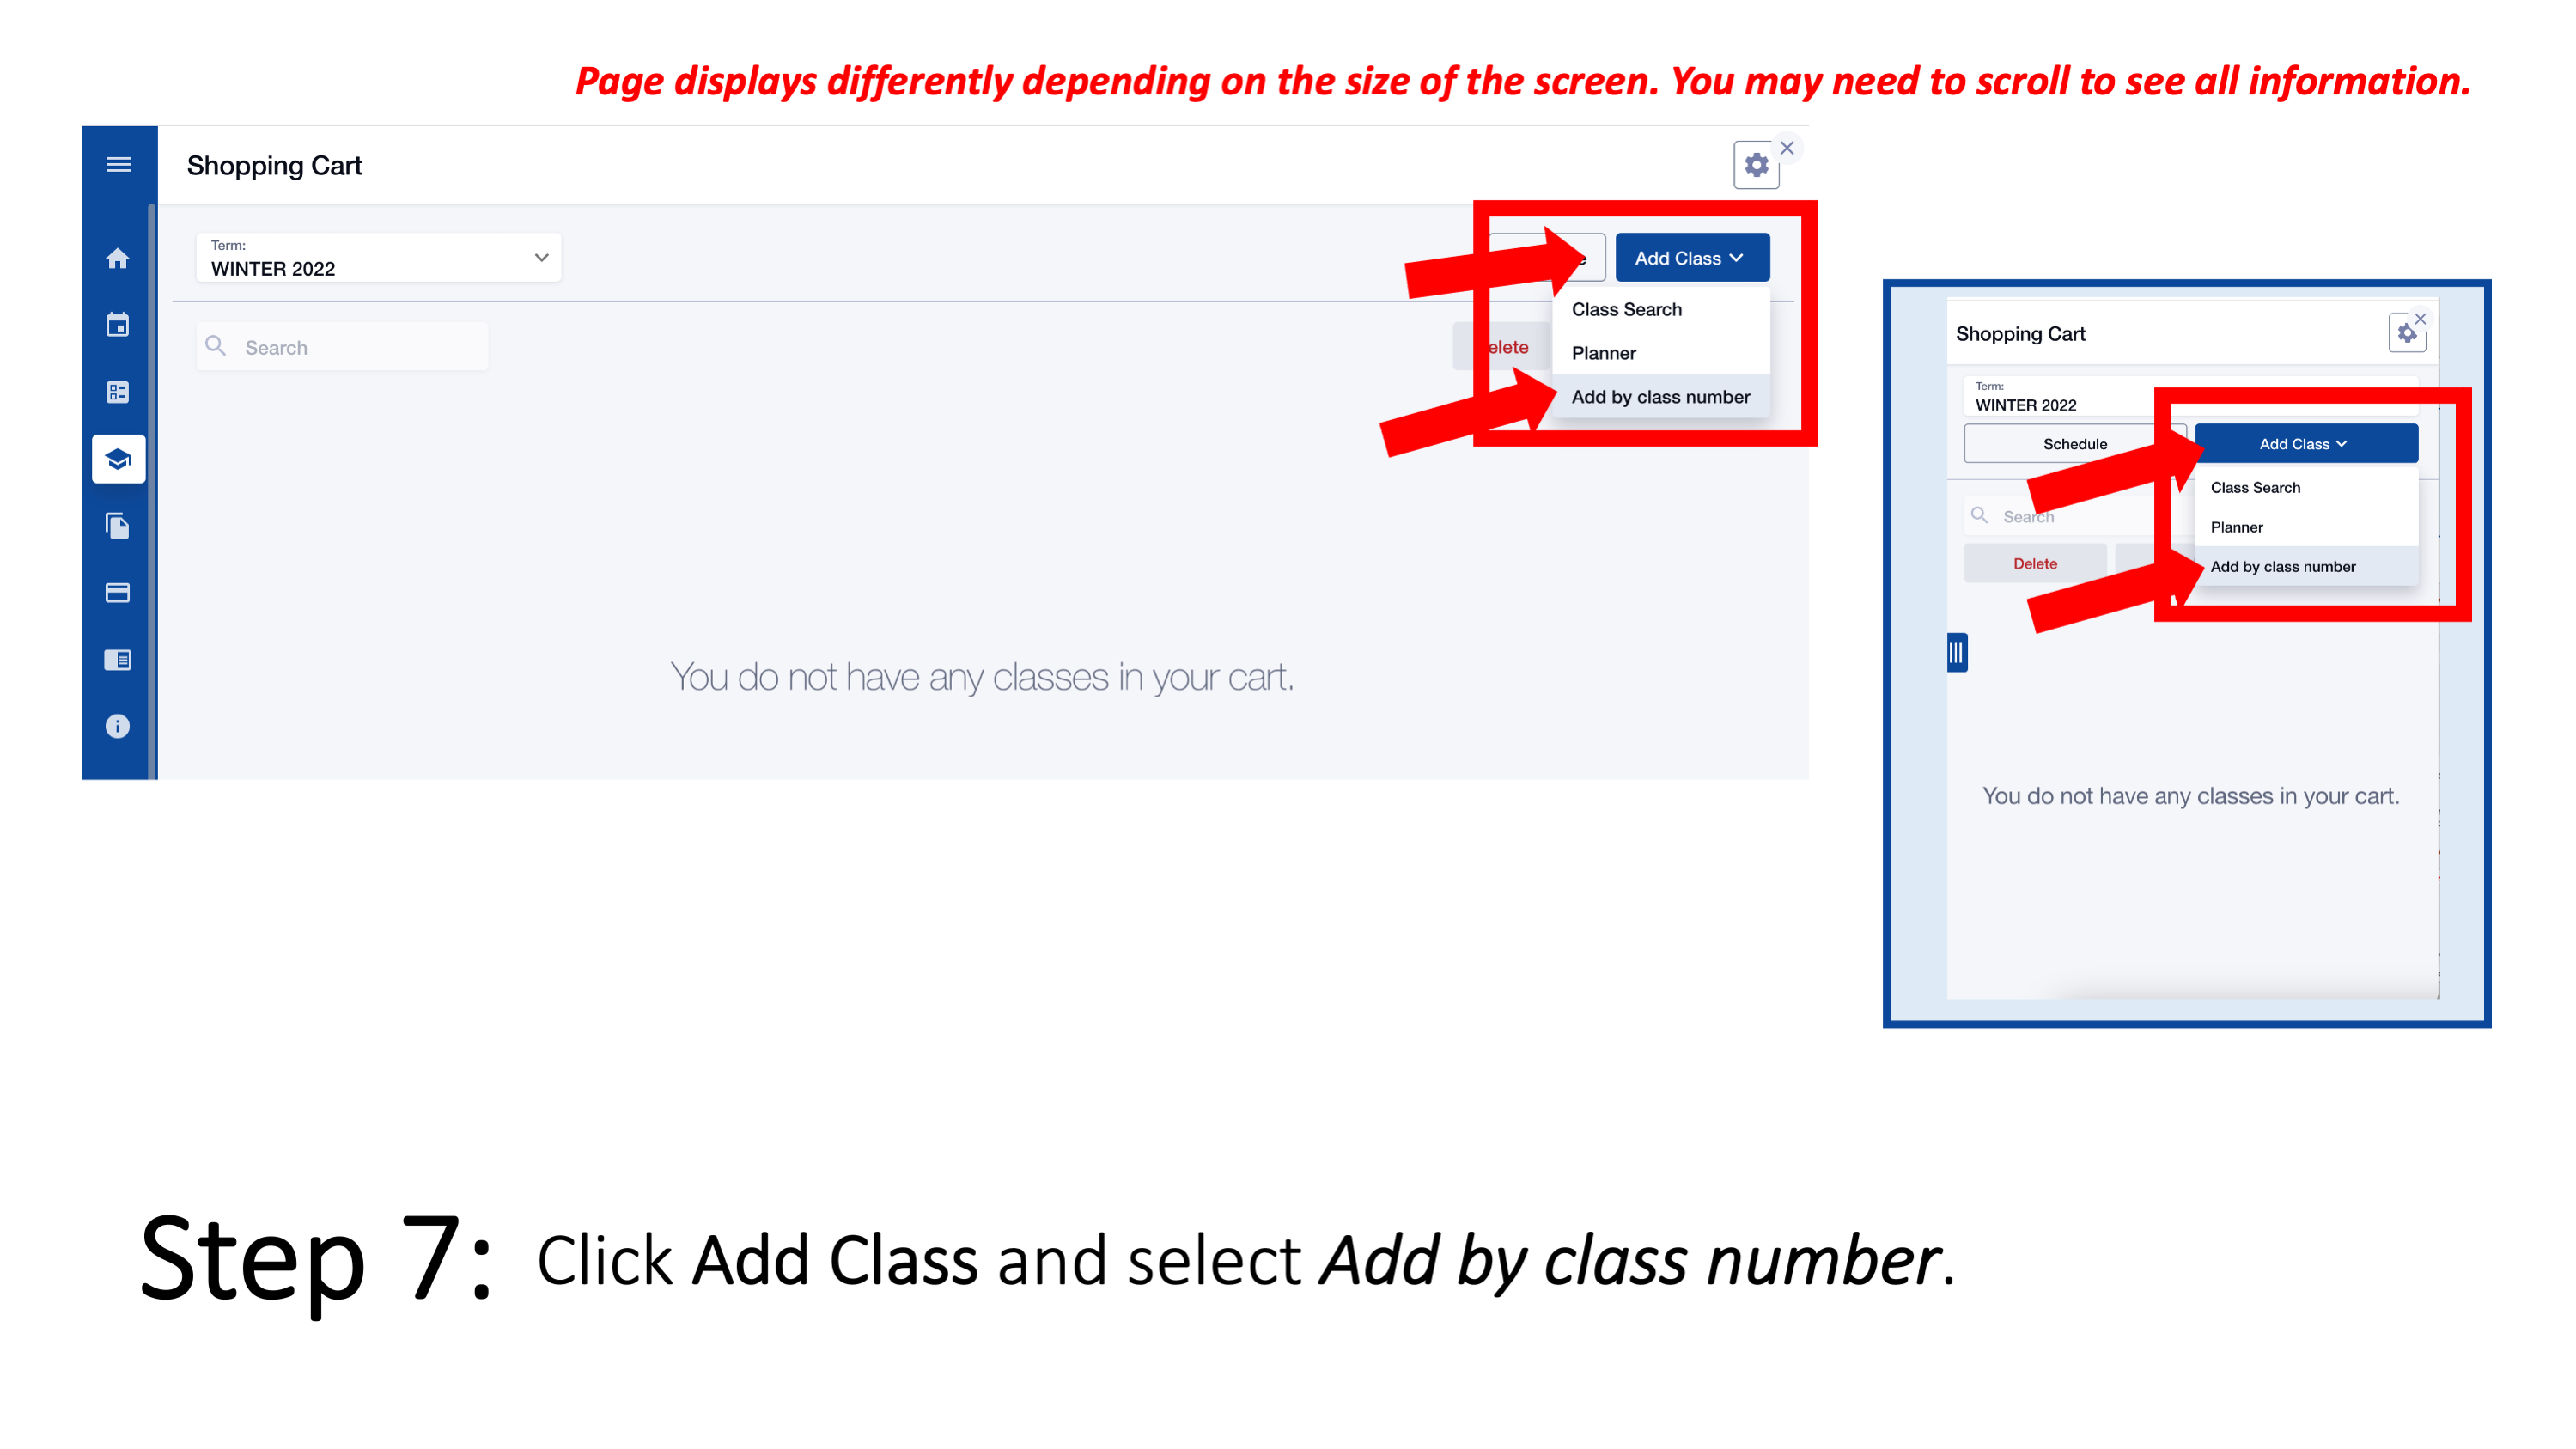 Step 7: Click Add Class and select Add by class number.